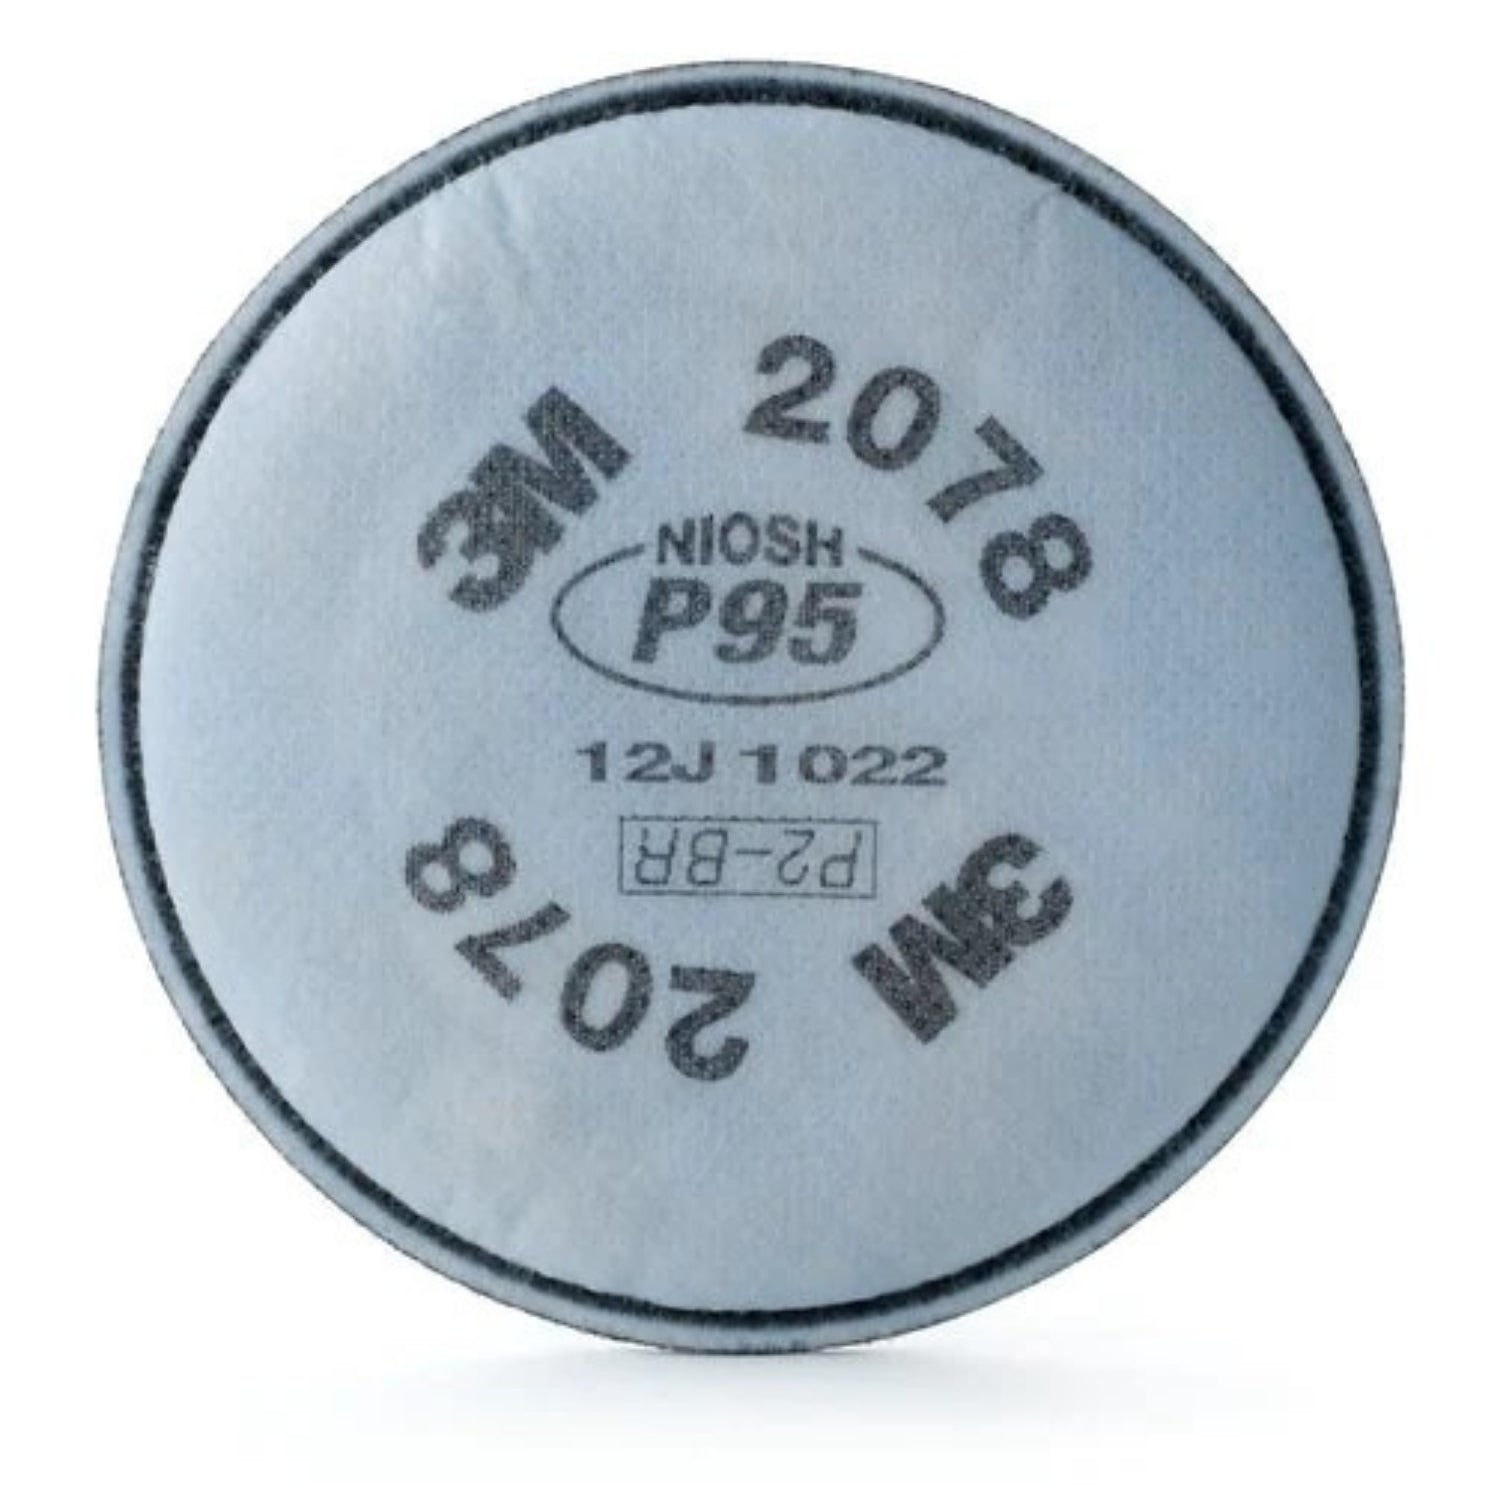 3M™ Particulate Filter 2078, P95, with Nuisance Level Organic Vapor/Acid Gas Relief